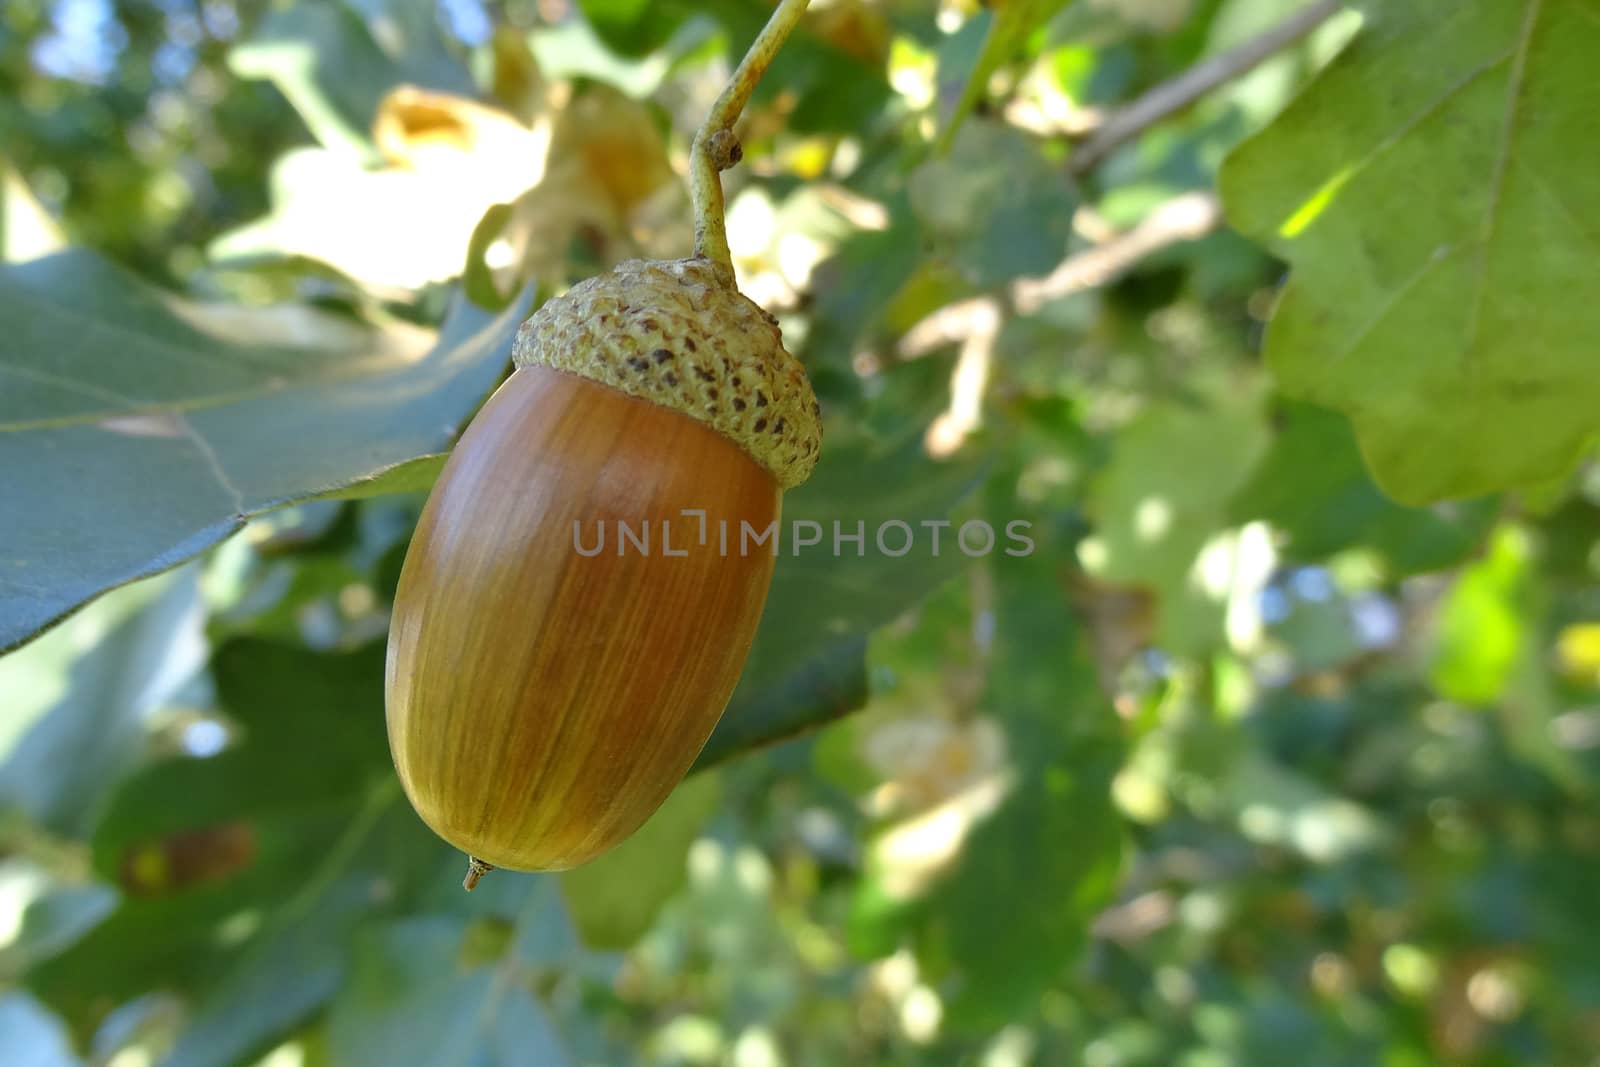 Ripe acorn on a sunny day. Acorns are an ingredient for making acorn bread or cake and acorn coffee from it